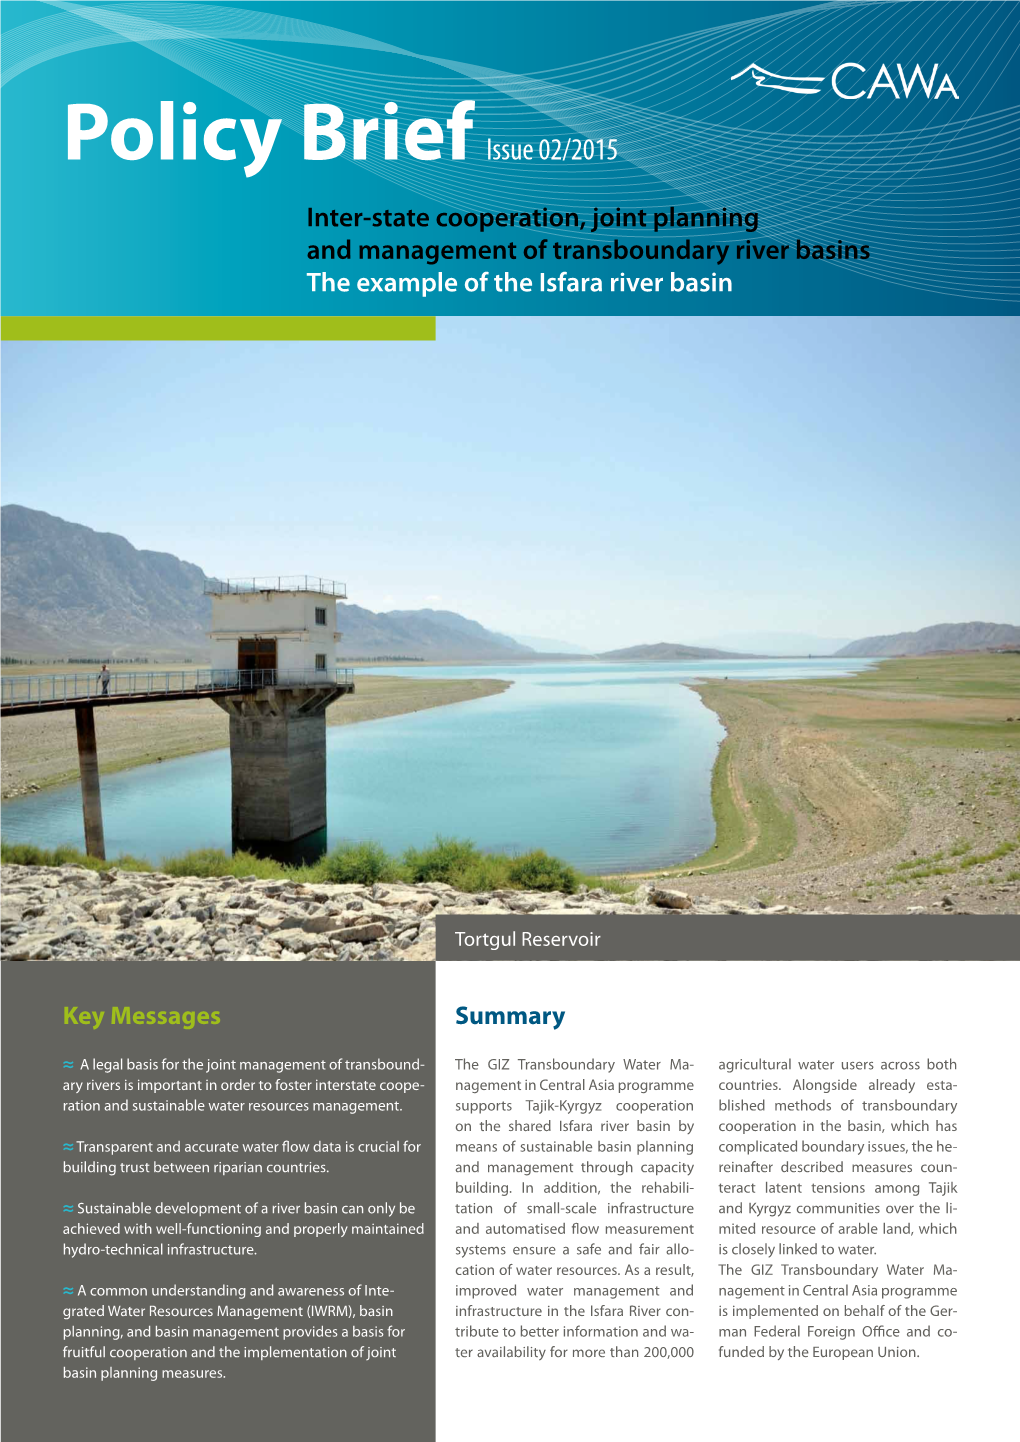 Inter-State Cooperation and Joint Planning and Management of Transboundary River Basins